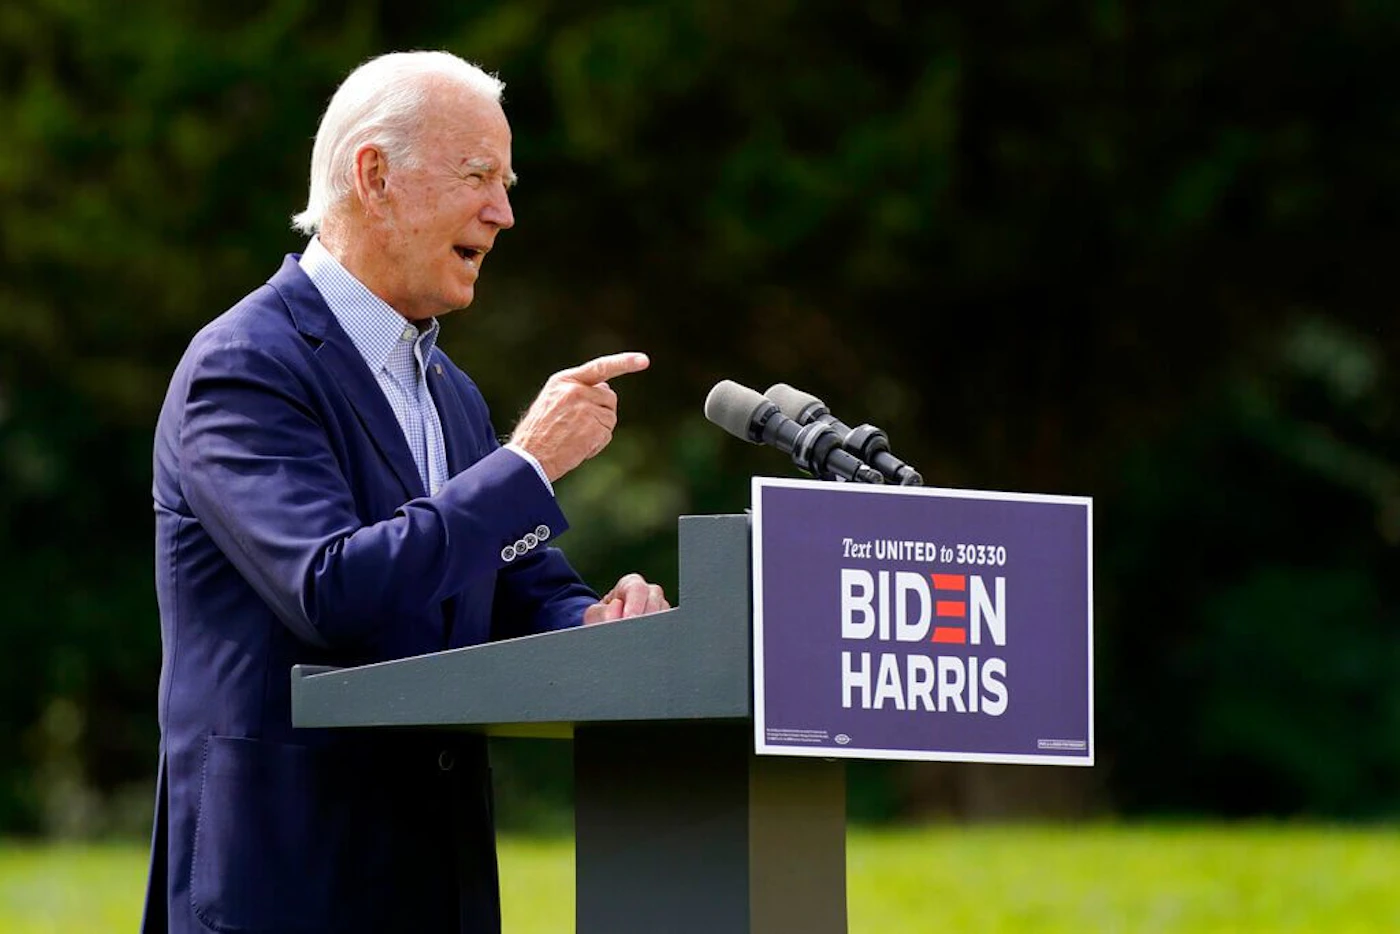 Democratic presidential candidate and former Vice President Joe Biden speaks about climate change and wildfires affecting western states, Monday, Sept. 14, 2020, in Wilmington, Del. (AP Photo/Patrick Semansky)